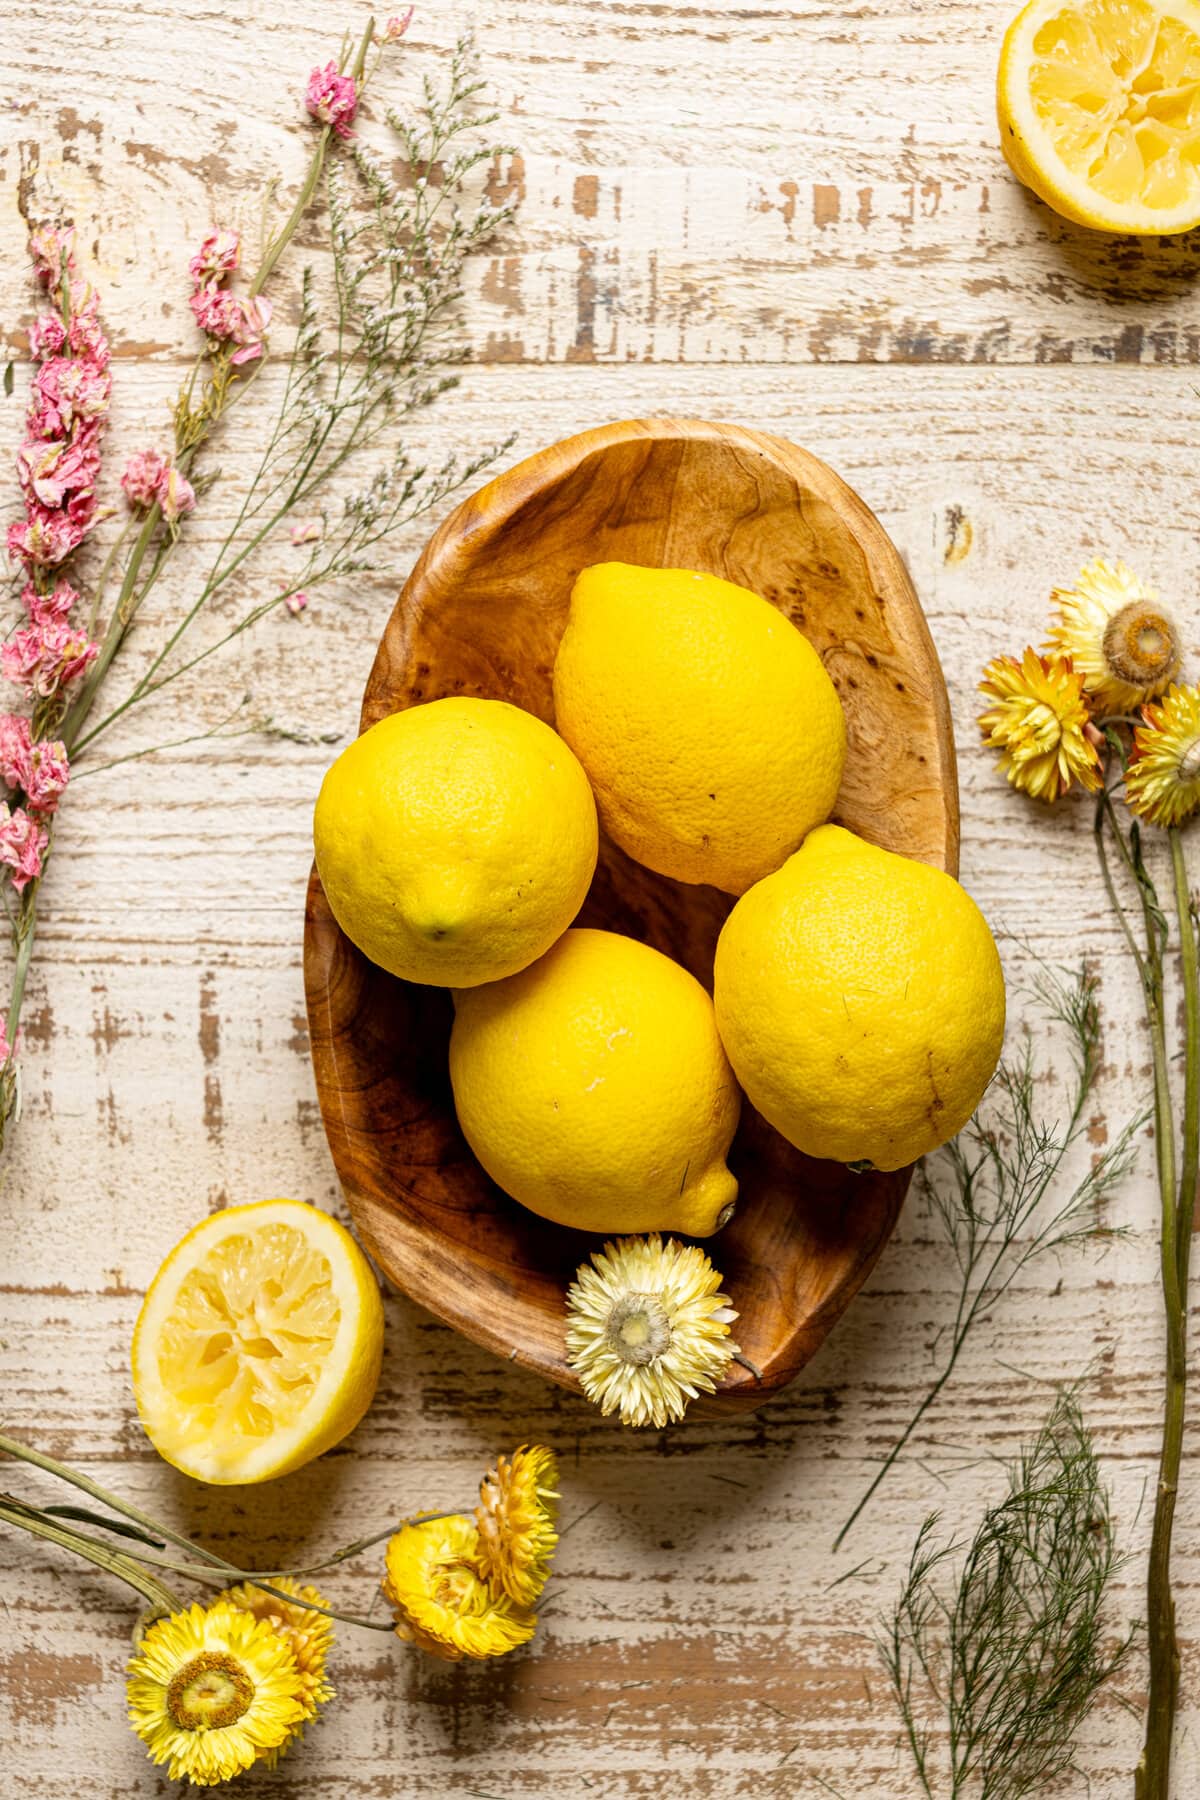 Wooden bowl of lemons surrounded by flowers